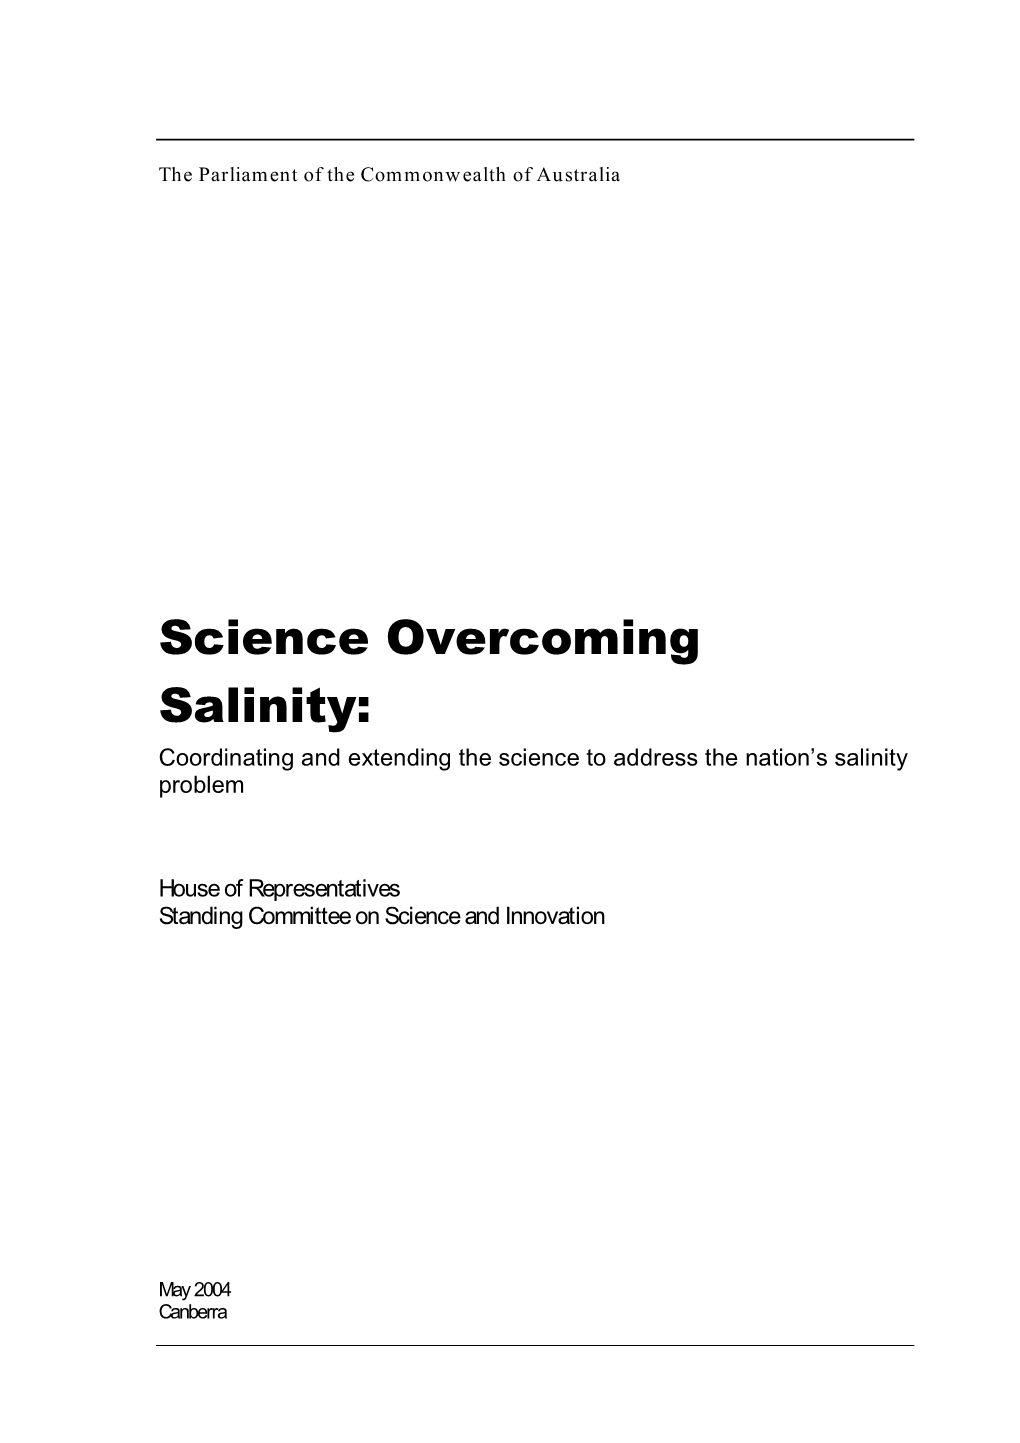 Science Overcoming Salinity: Coordinating and Extending the Science to Address the Nation’S Salinity Problem